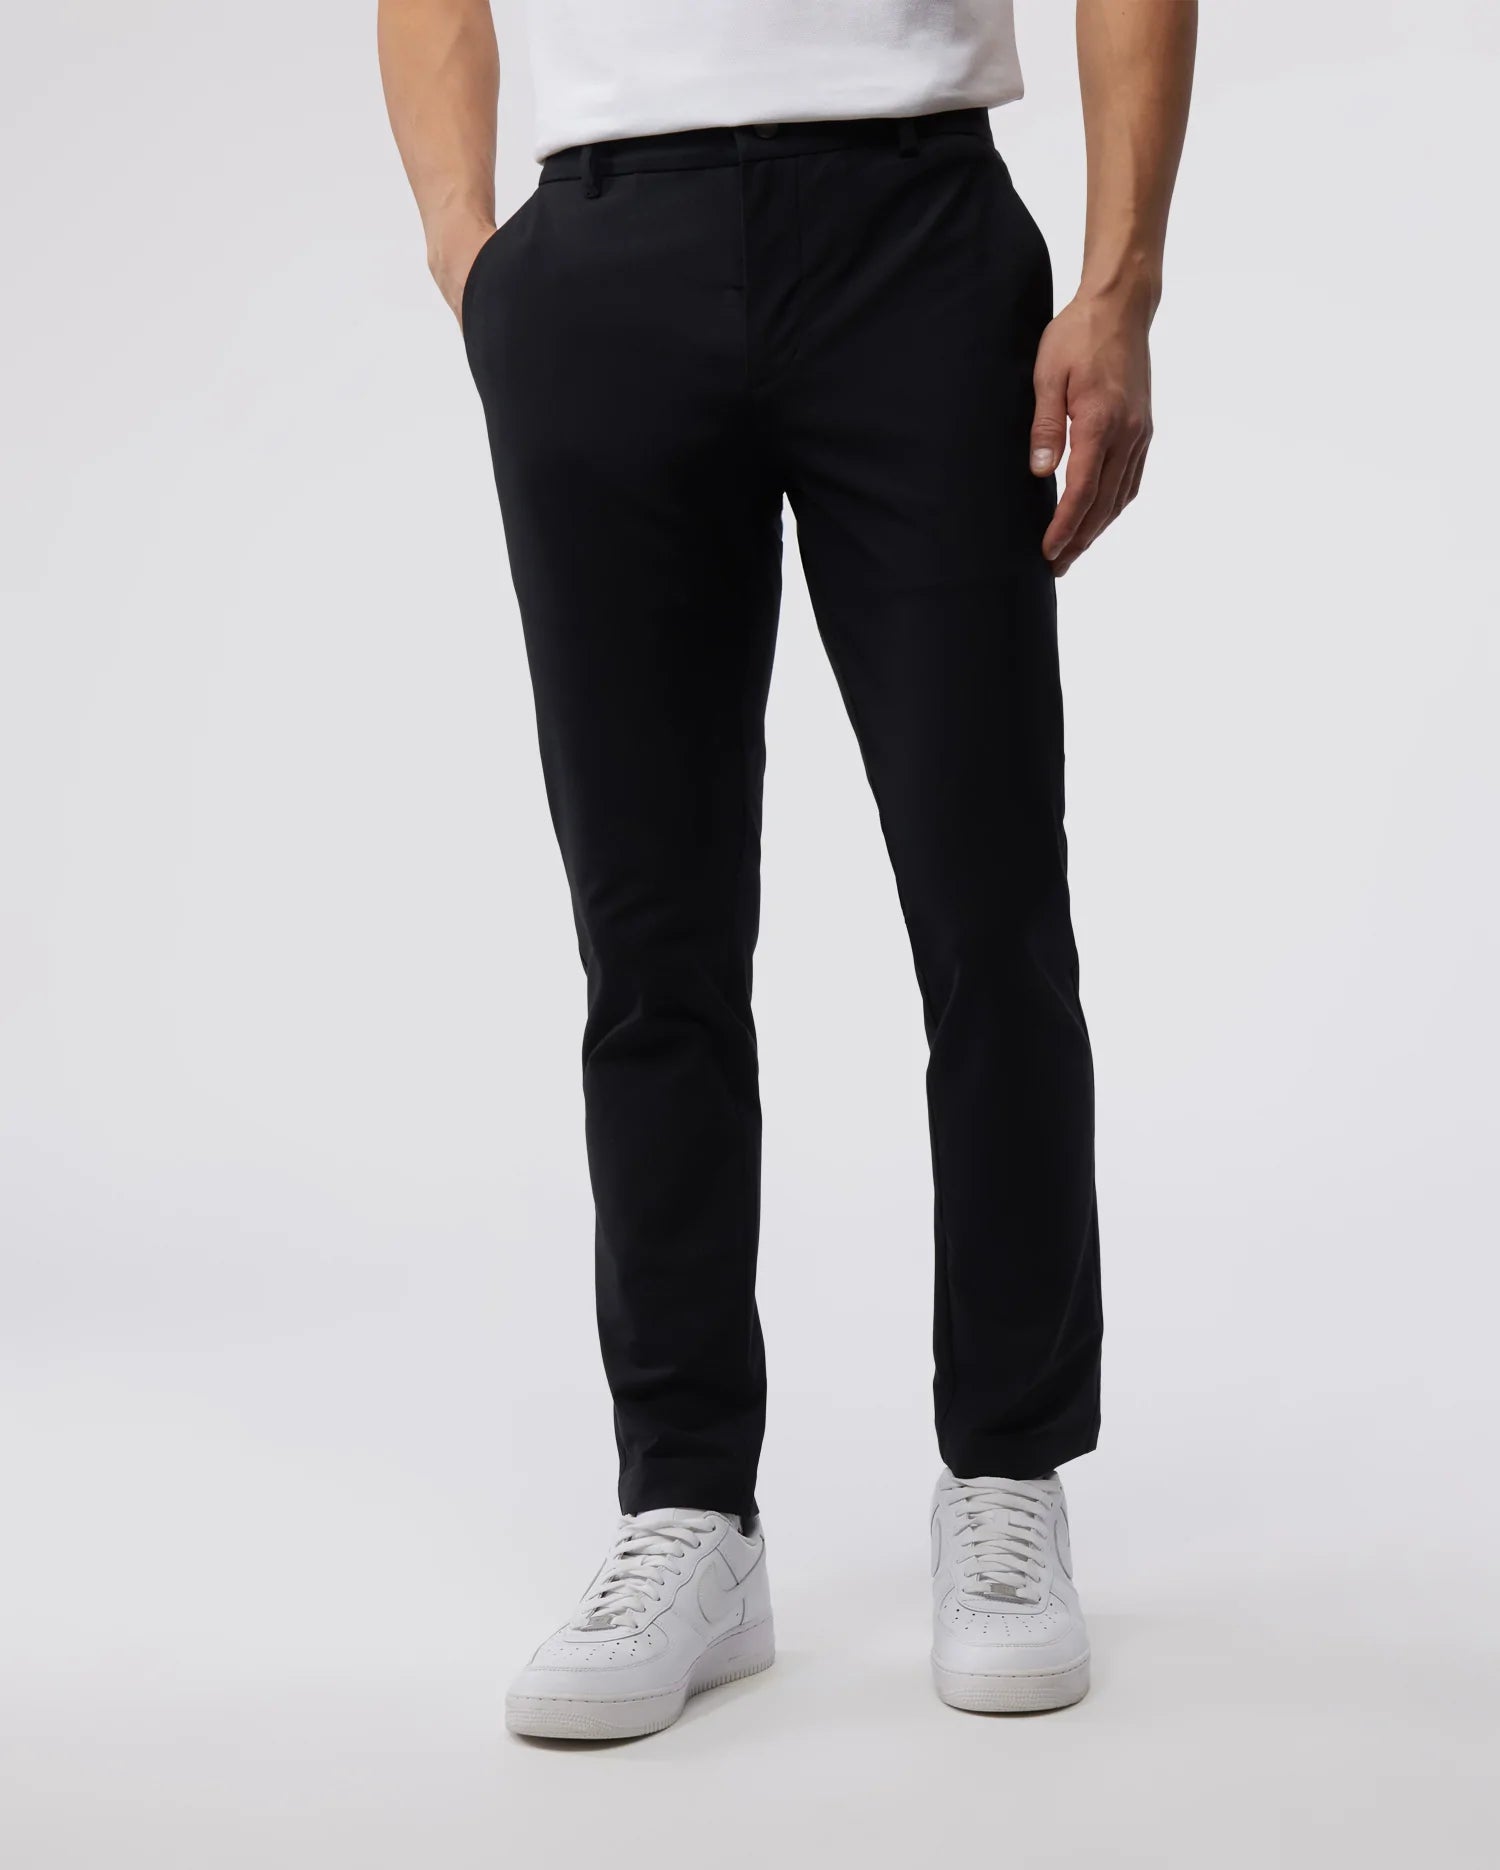 TANGNADE sports and leisure mens cotton trousers India | Ubuy